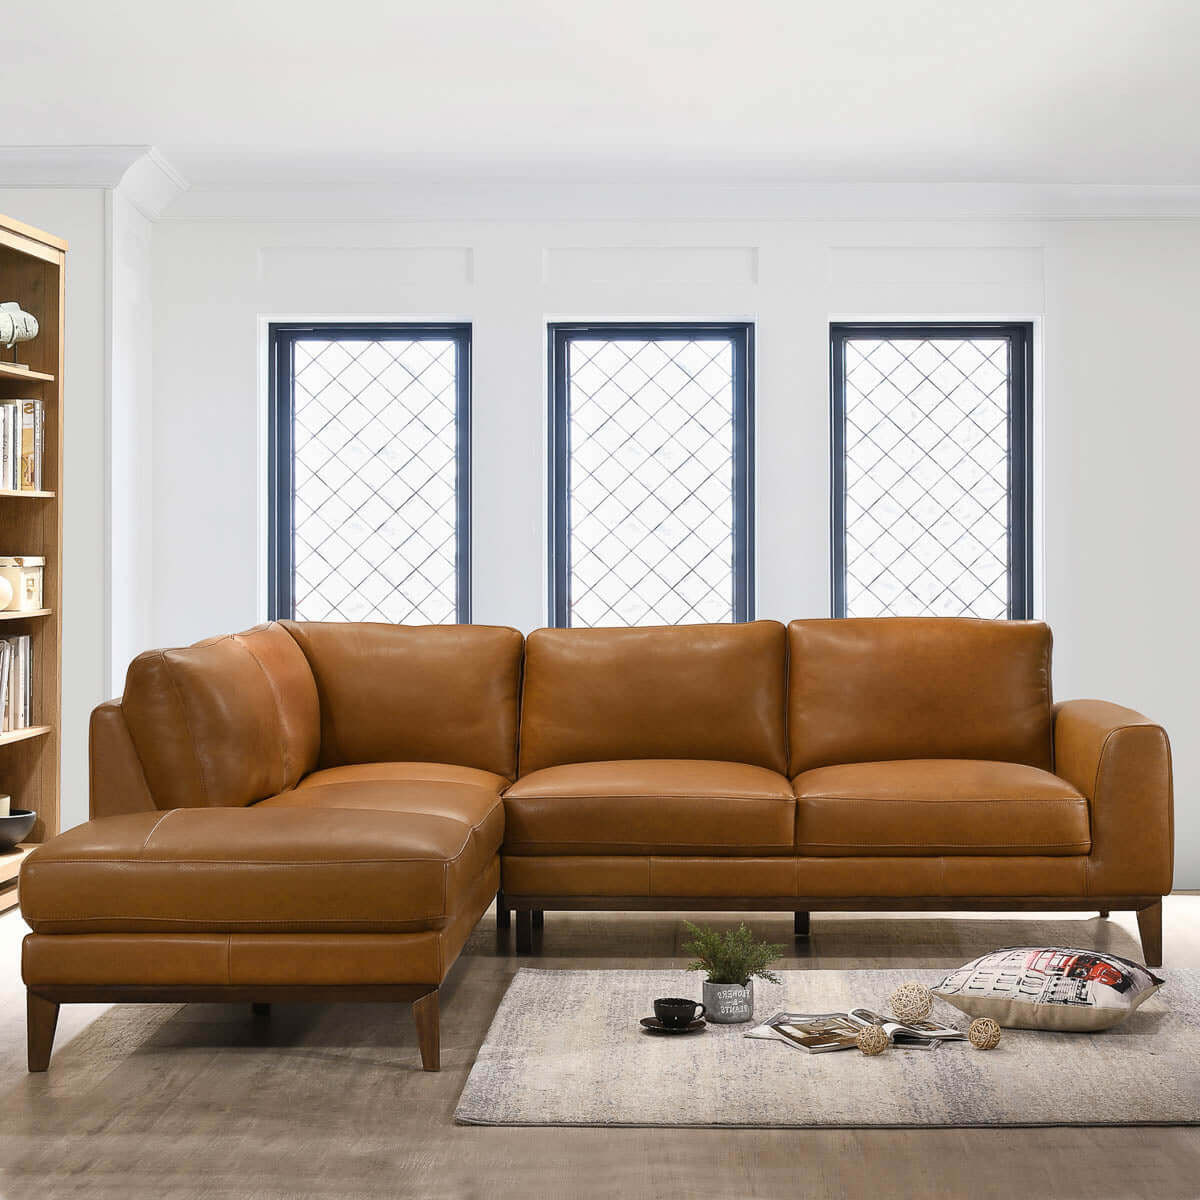 London Mid-Century Modern Leather Sectional Sofa Right-Facing